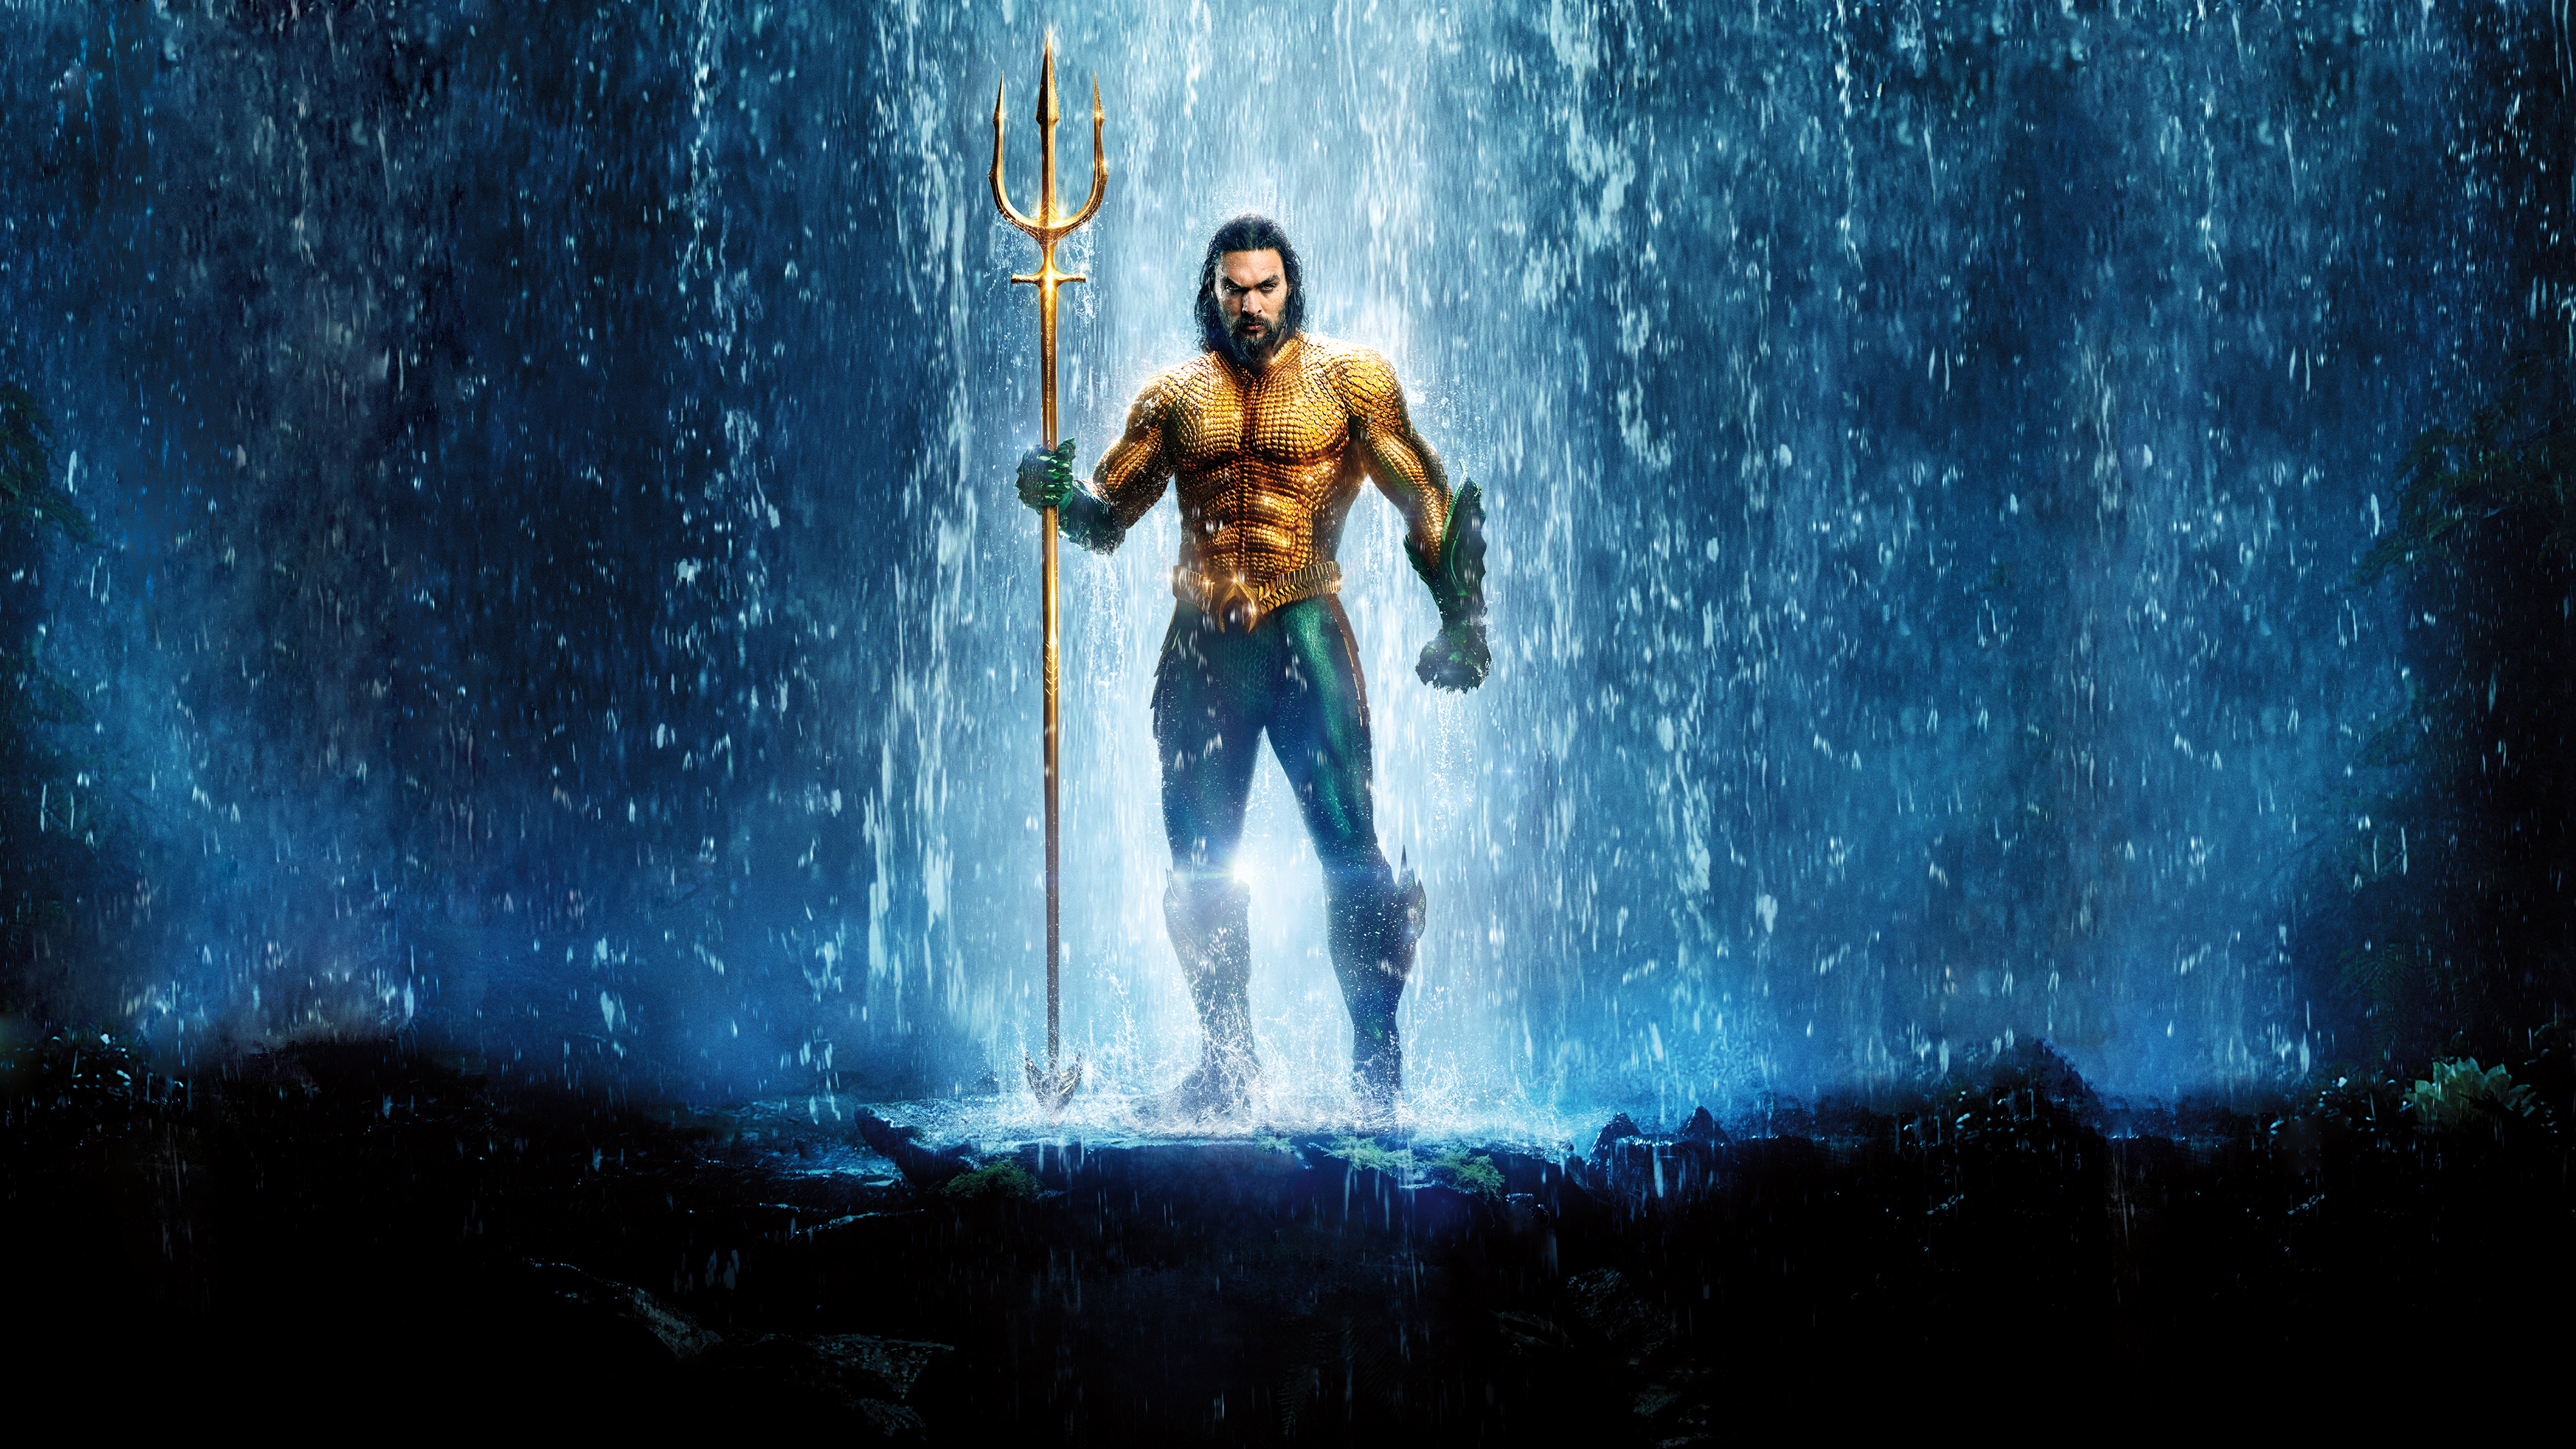 Aquaman Textless Poster 2018 Wallpaper, HD Movies 4K Wallpapers, Images